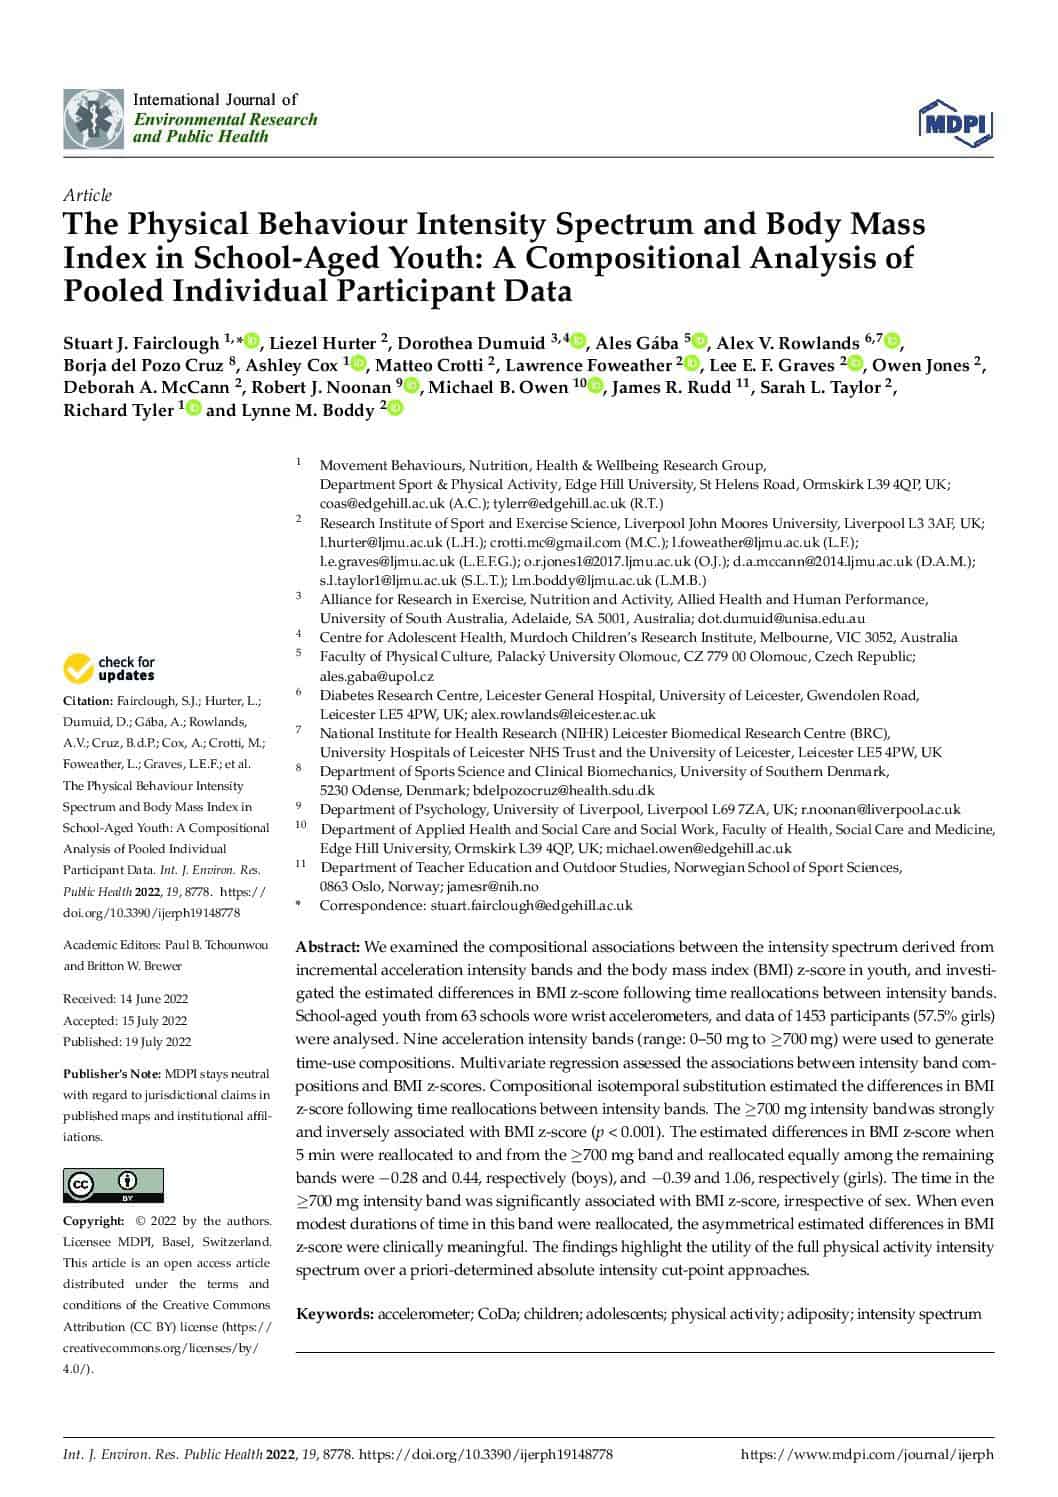 The Physical Behaviour Intensity Spectrum and Body Mass Index in School-Aged Youth: A Compositional Analysis of Pooled Individual Participant Data